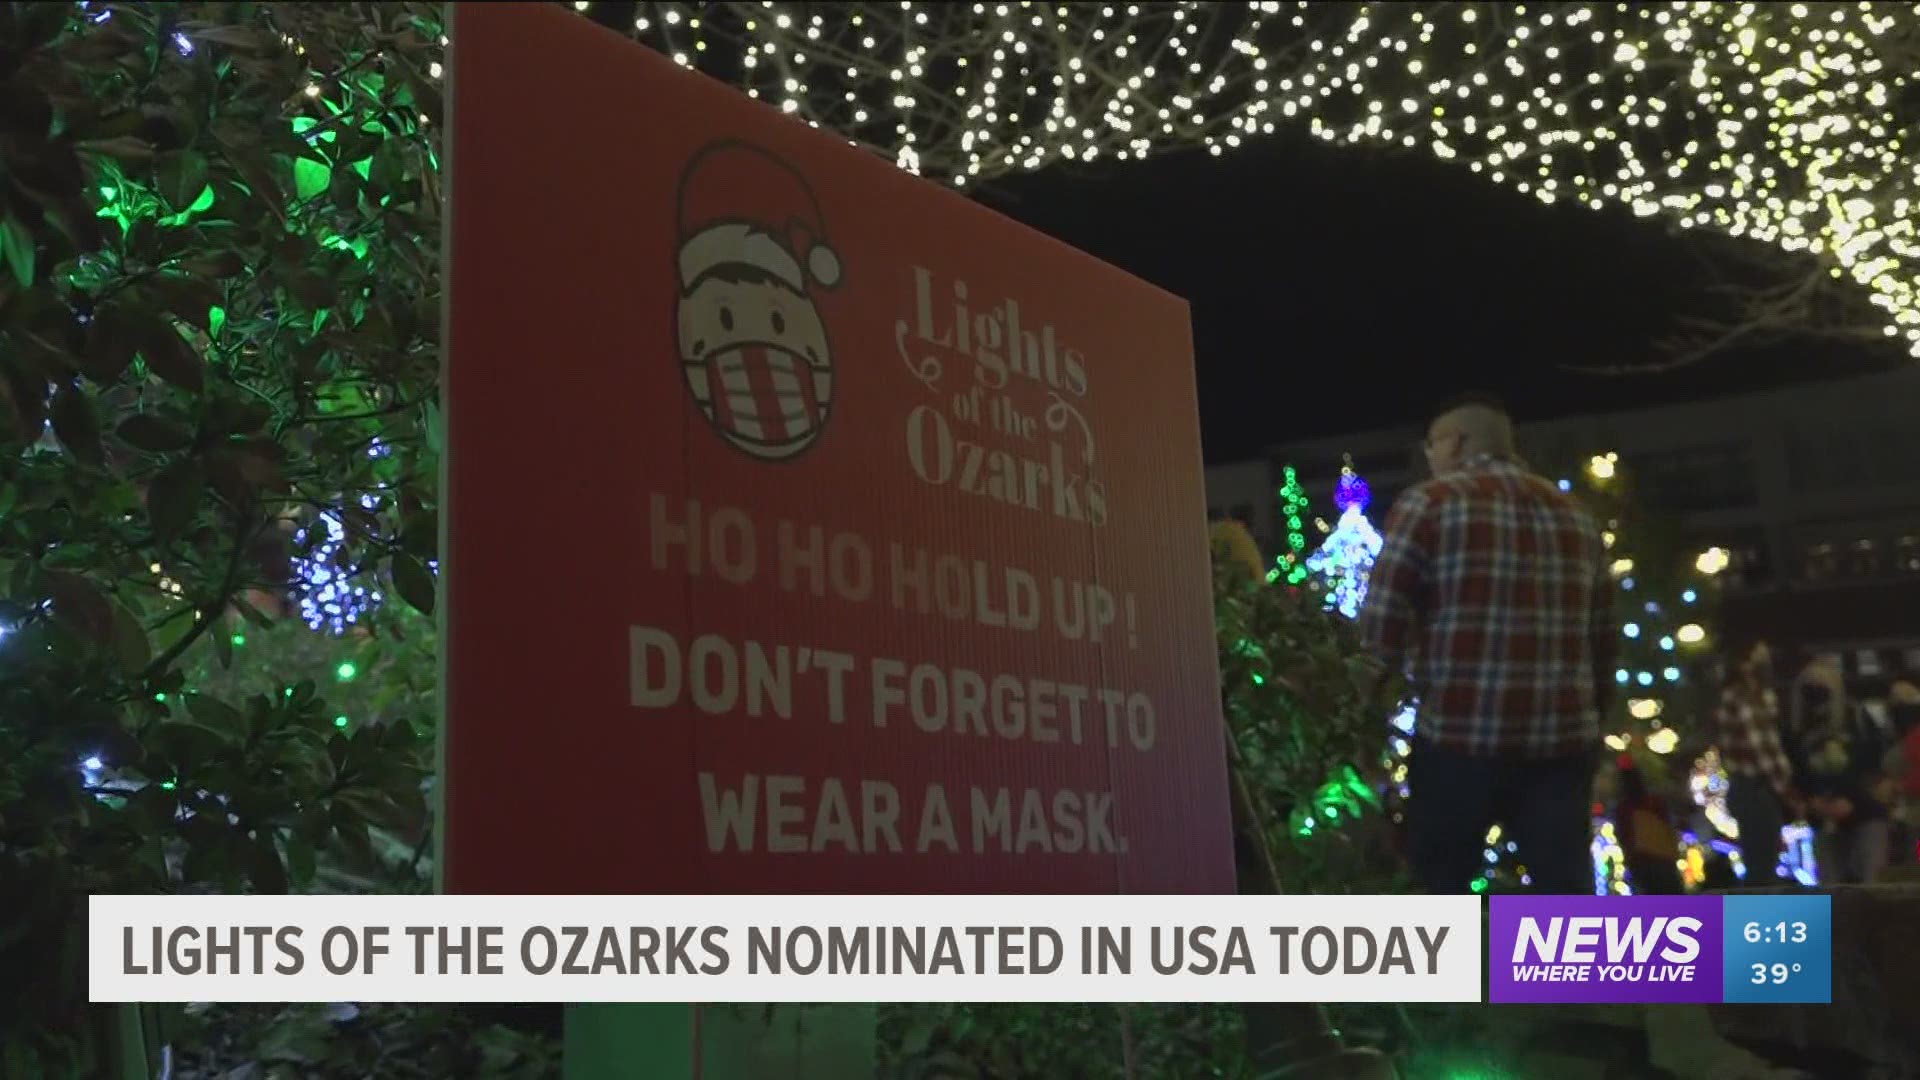 To help Fayetteville shine, vote for The Lights of the Ozarks in the USA Today 10Best list once a day through Dec. 7.